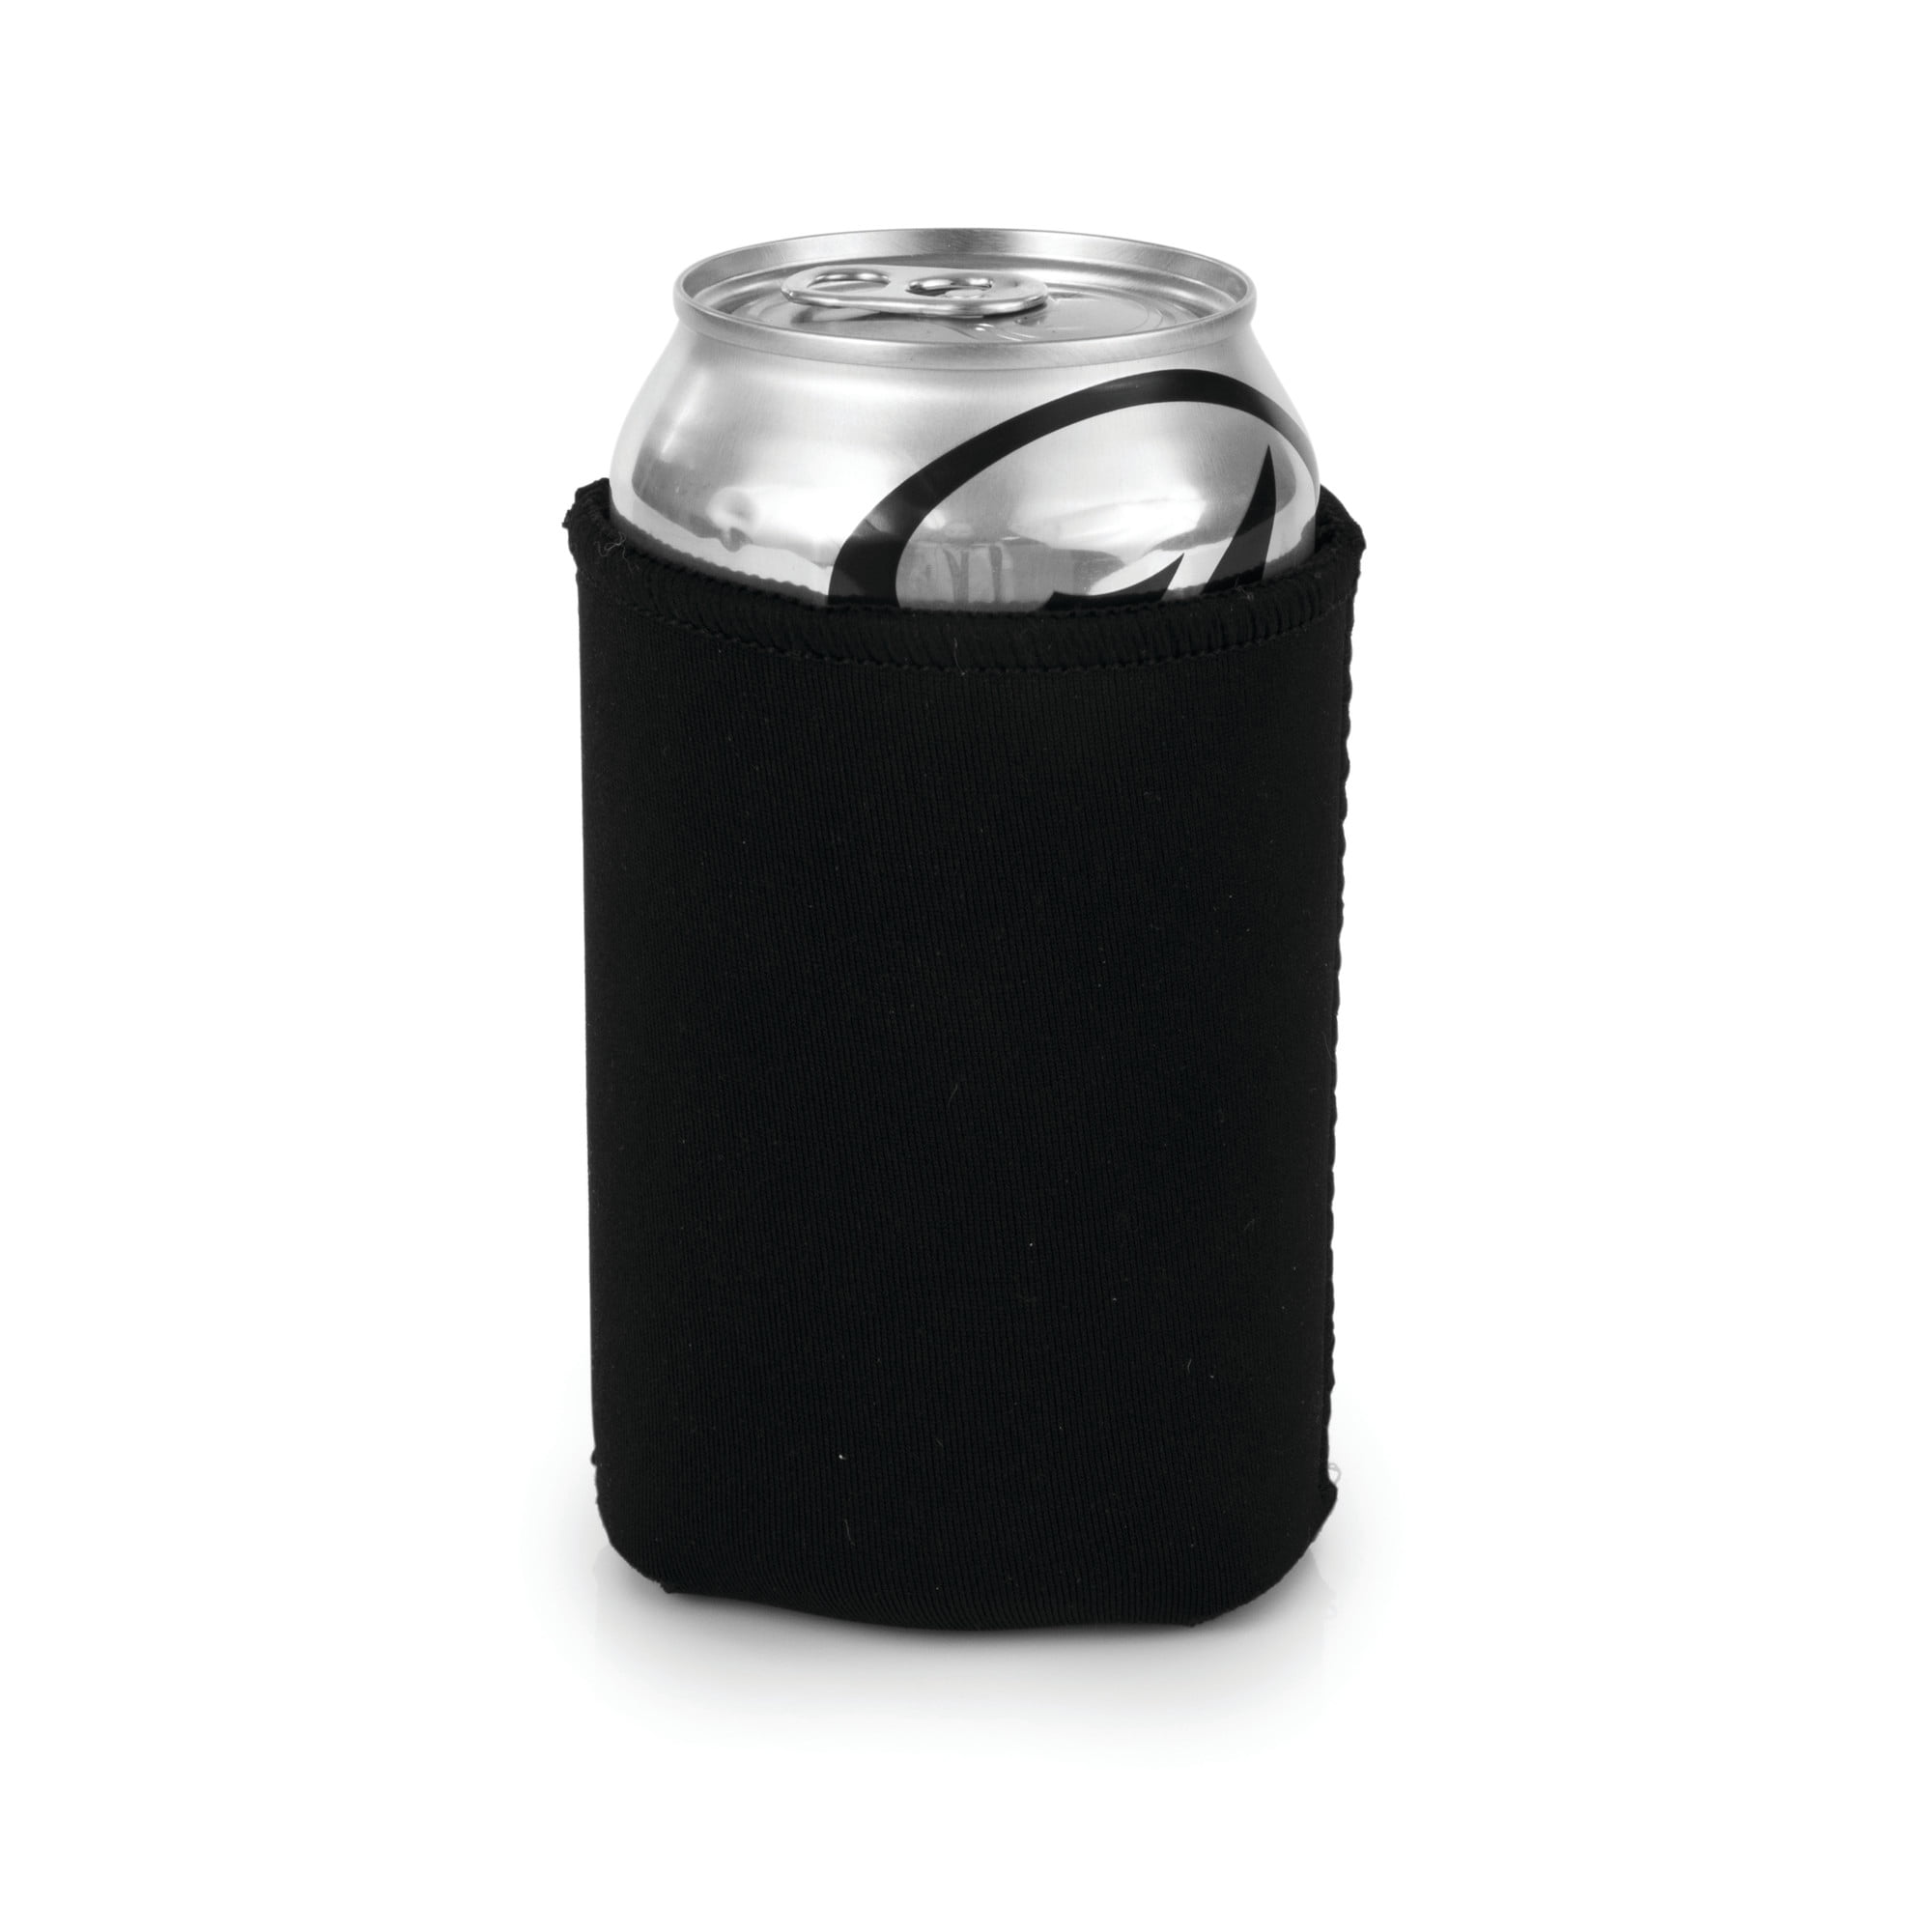 handmade drink cozy - beer cooler - adjustable bottle jacket - black white  gray - can sleeve - insulated cozy - one brown paw